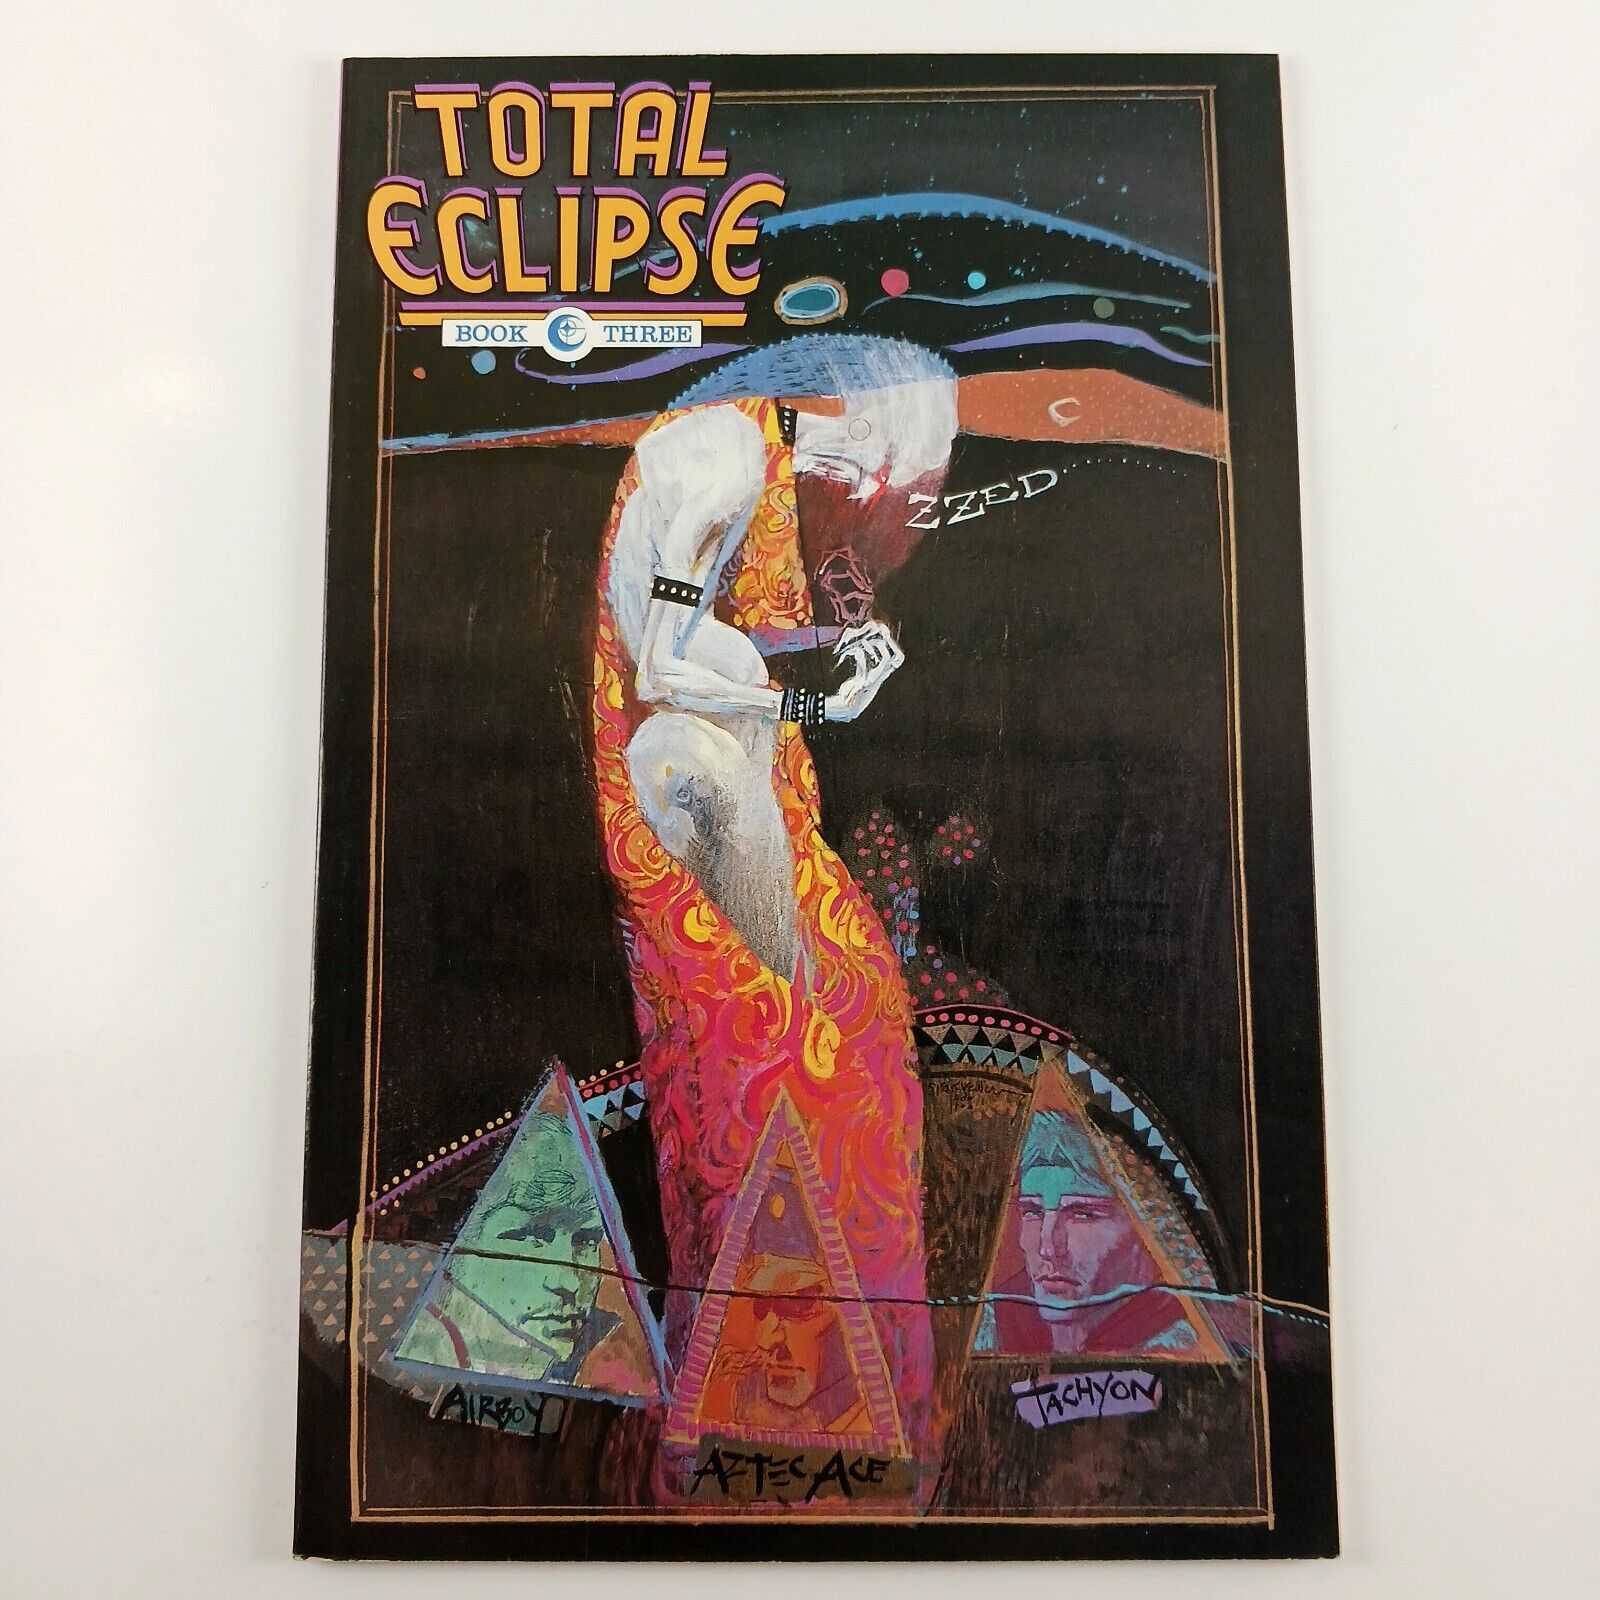 Total Eclipse #3 - Eclipse Comics - 1988 - Zzed - Marv Wolfman